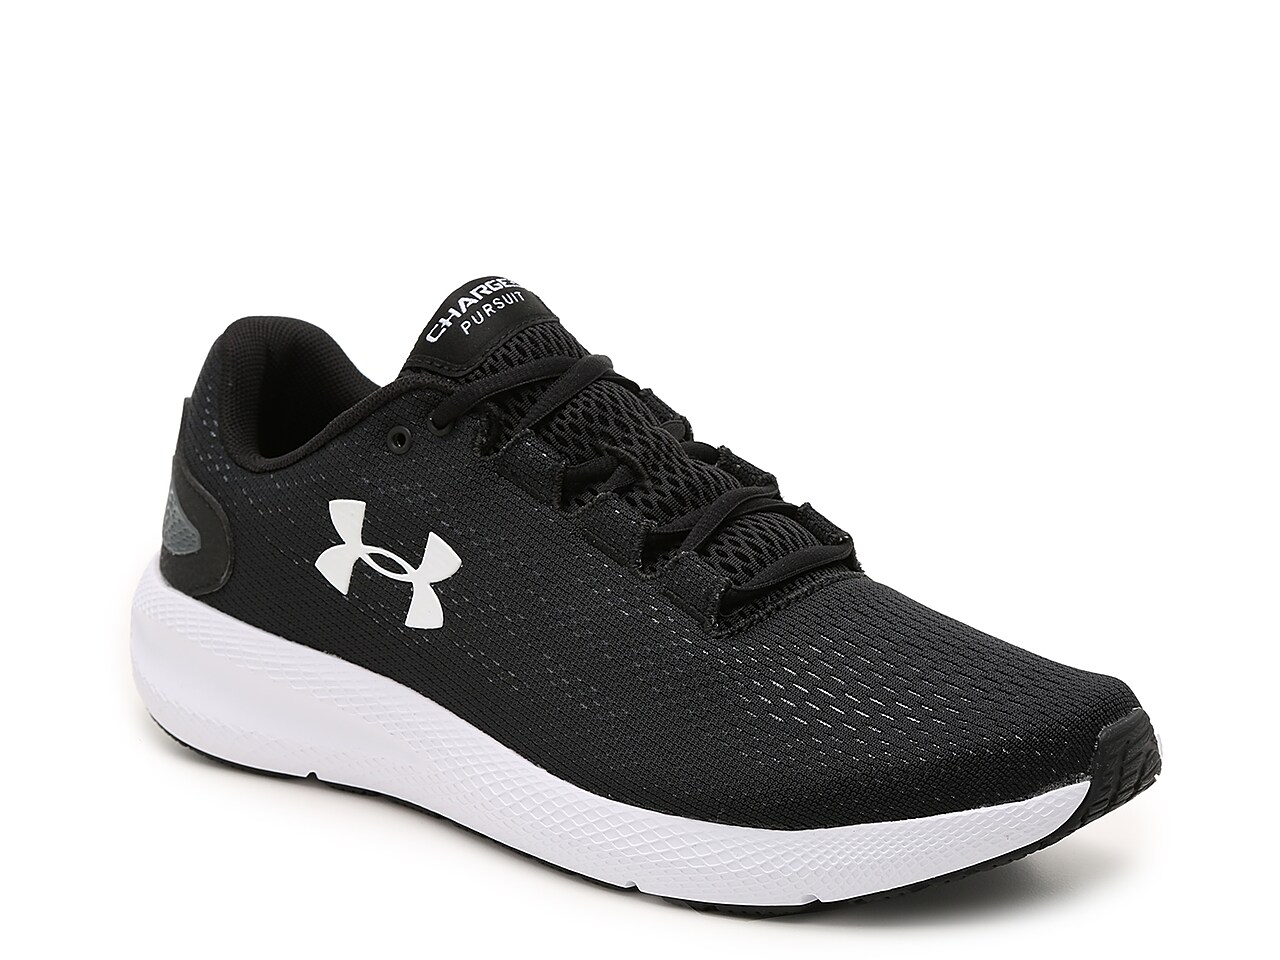 Blue Under Armour Mens Charged Pursuit 2 Running Shoes Trainers Sneakers